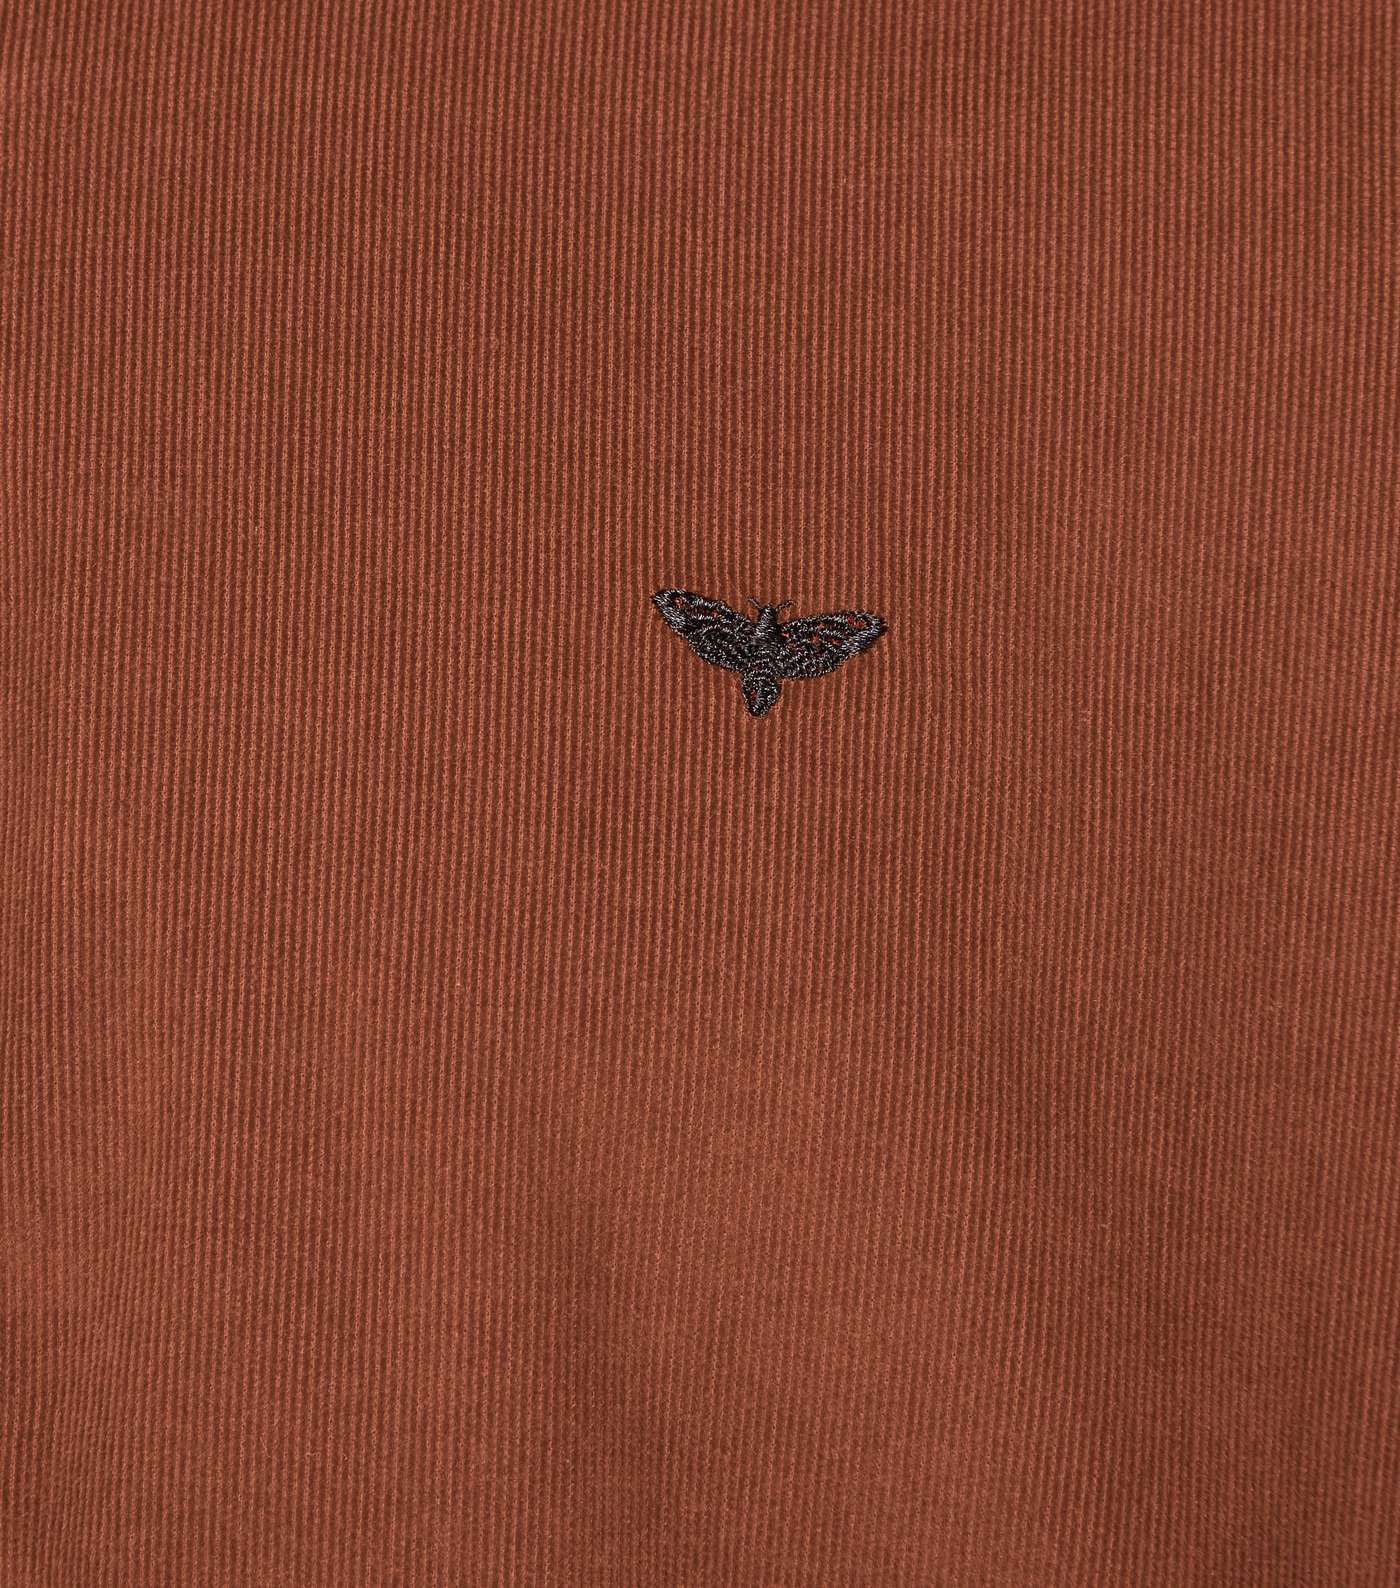 Rust Cord Moth Embroidered Oversized Shirt  Image 5